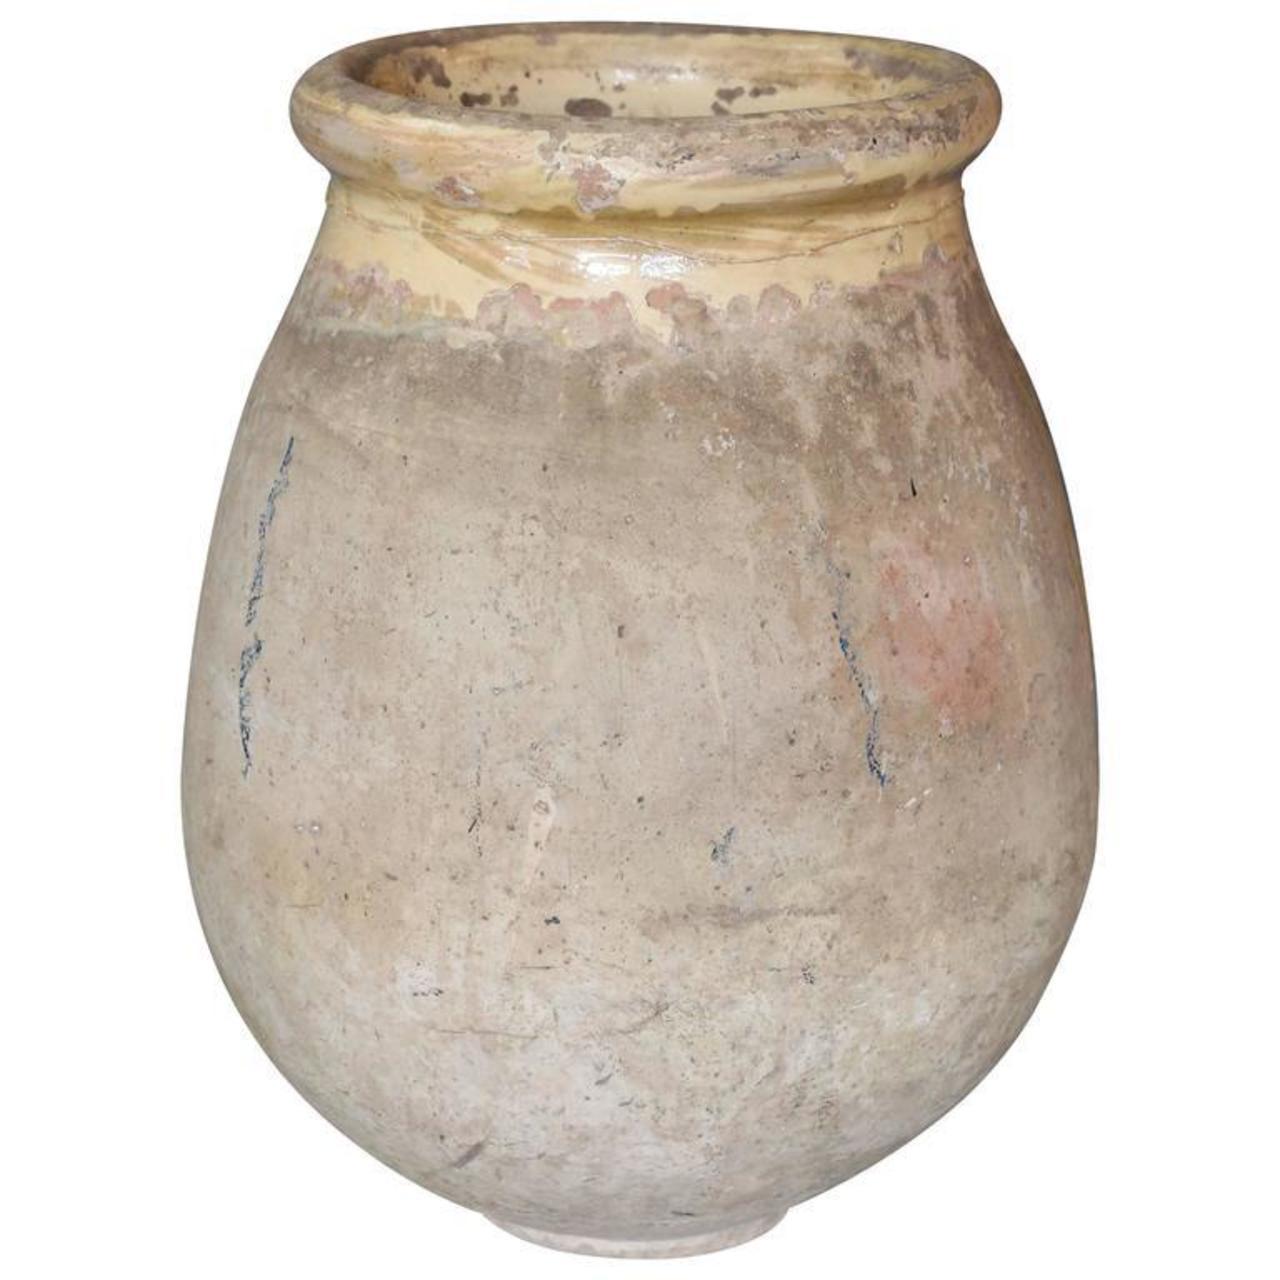 French Biot jar, mid-19th century terracotta jar in traditional Biot shape with yellow-glazed rim and interior.